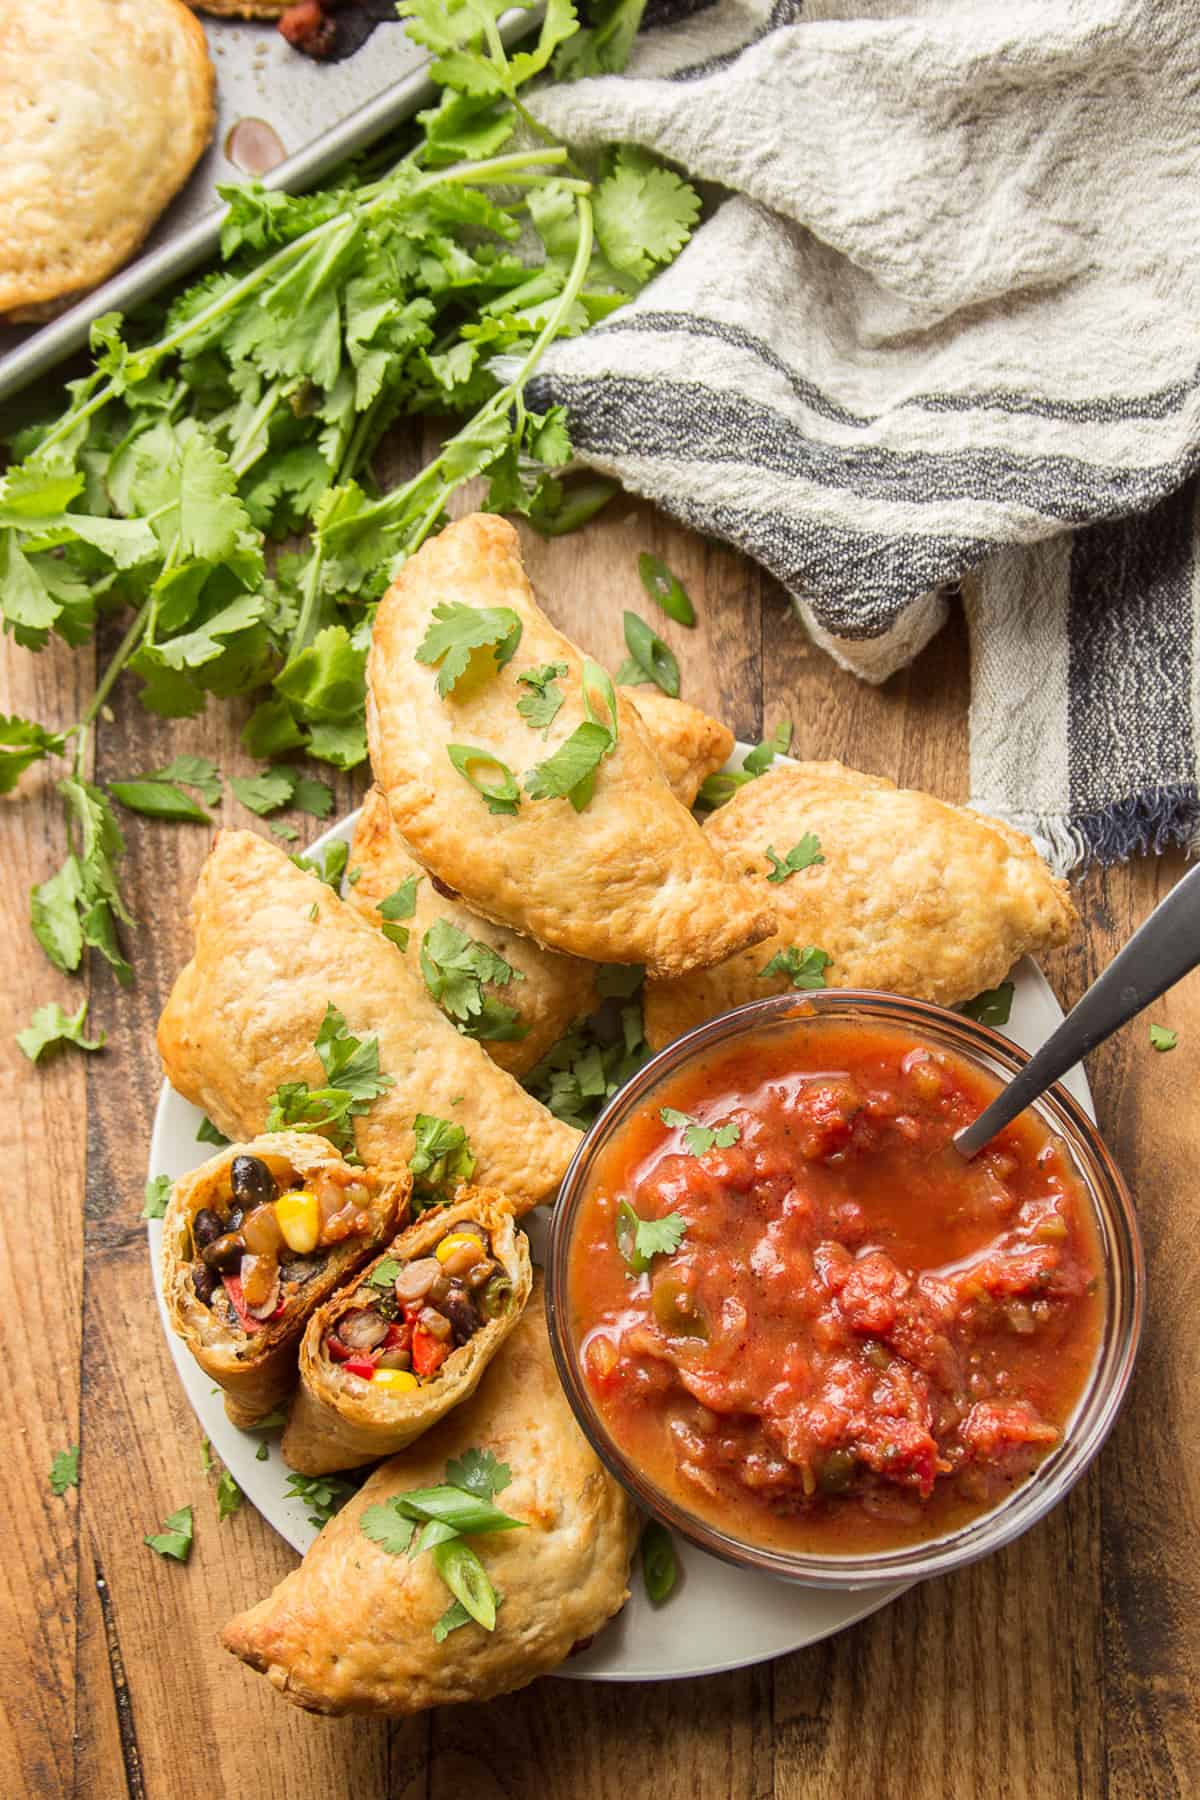 Wooden surface set with a plate of Vegan Empanadas and dish of salsa.